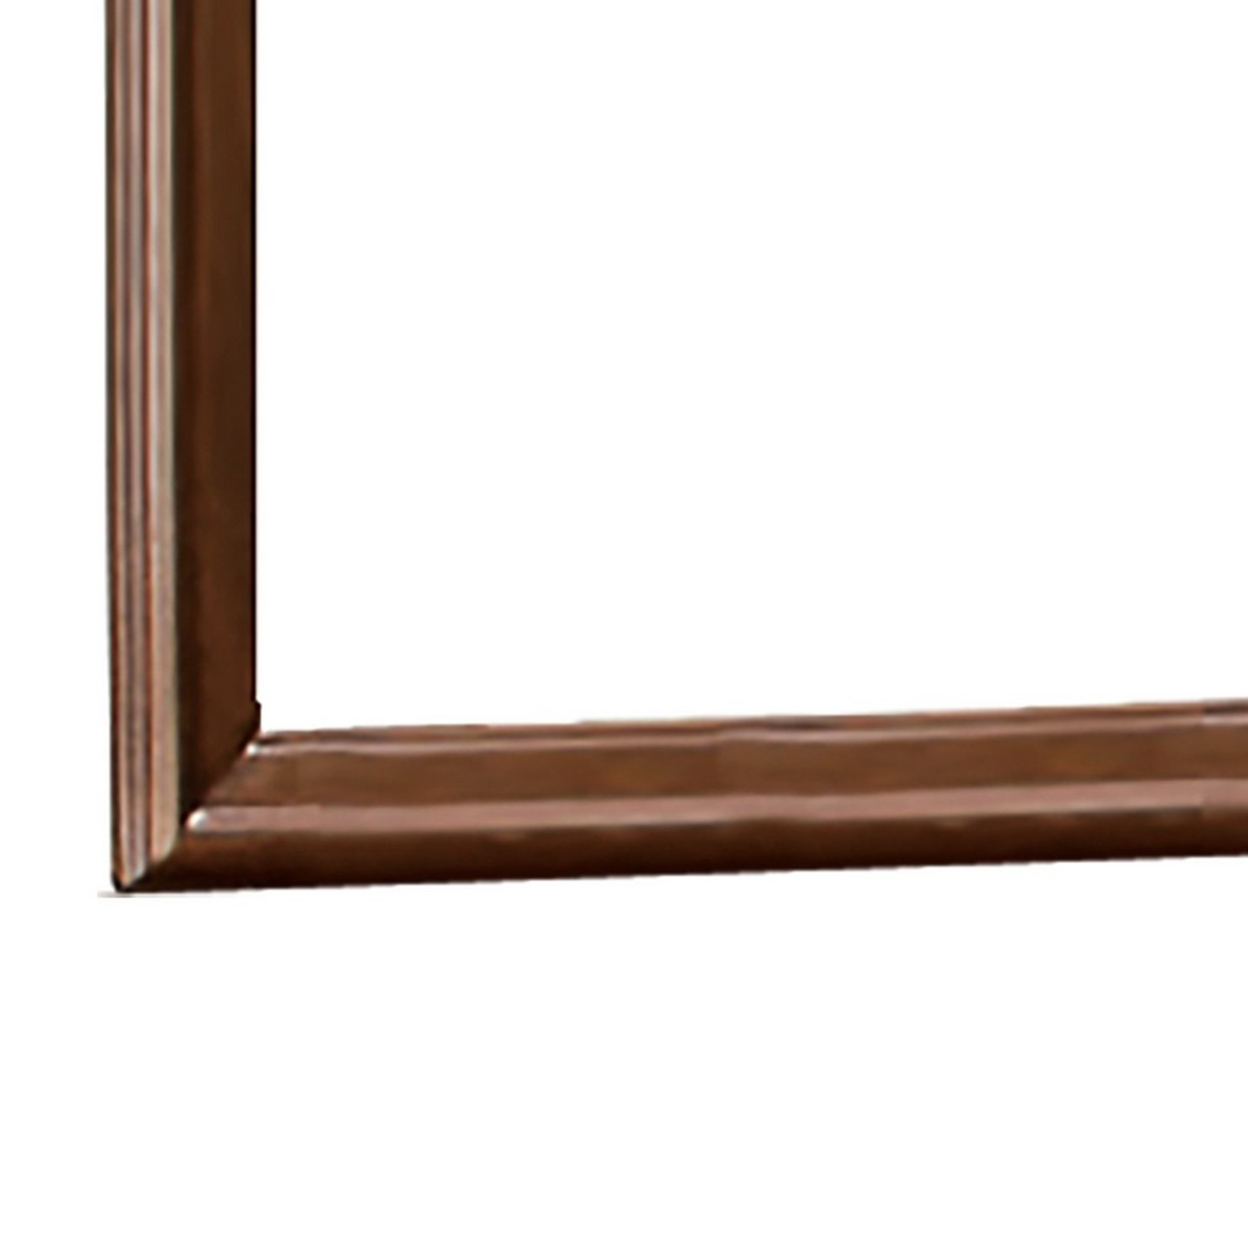 Arched Molded Design Wooden Frame Mirror, Cherry Brown And Silver- Saltoro Sherpi